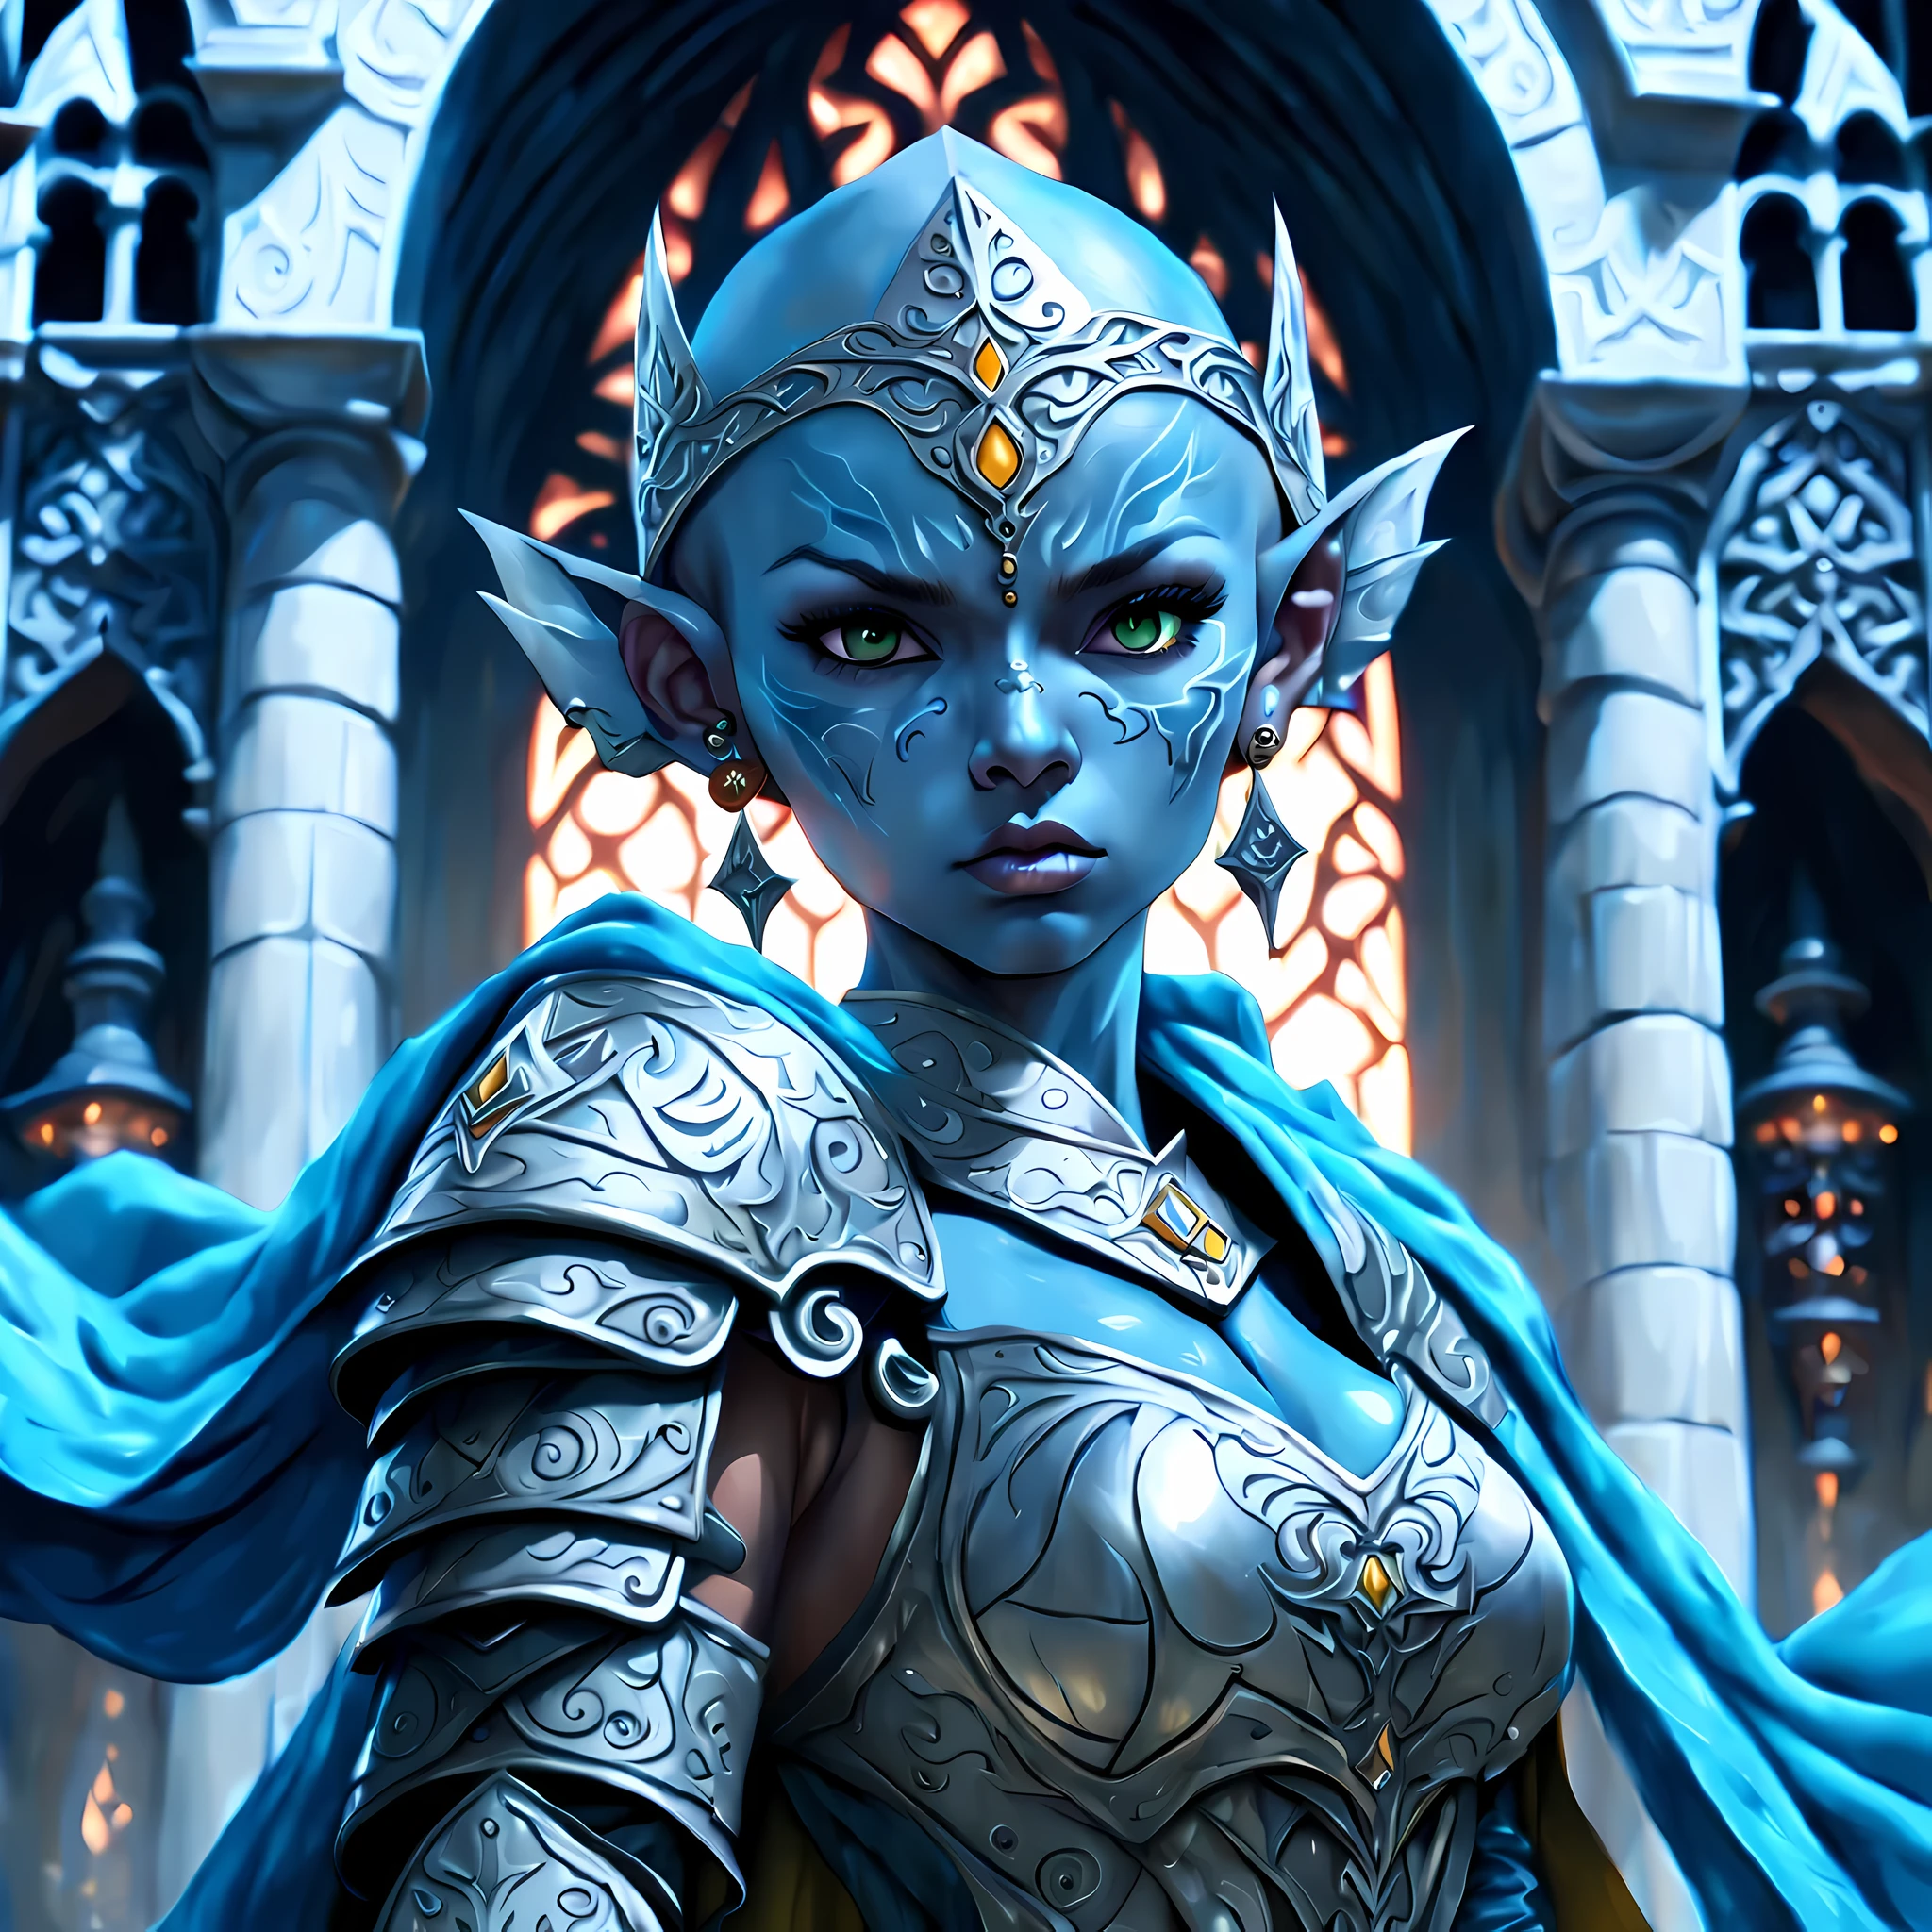 fAntAsy Art, dnd Art, RPG Art, 广角镜头, (mAsterpiece: 1.4) A (portrAit: 1.3) intense detAils, highly detAiled, photoreAlistic, best quAlity, 高分辨率, portrAit A femAle (fAntAsy Art, MAsterpiece, best quAlity: 1.3) ((蓝色的 skin: 1.5)), intense detAils fAciAl detAils, exquisite beAuty, (fAntAsy Art, MAsterpiece, best quAlity) 牧师, (蓝色的: 1.3) skinned femAle bAld heAd, no eArs, (绿色的: 1.3) 眼睛, fAntAsy Art, MAsterpiece, best quAlity) Armed A fiery sword red fire, weAring heAvy (白色的: 1.3) hAlf plAte mAil Armor, weAring high heeled lAced boots, weAring An(orAnge :1.3) cloAk, weAring glowing holy symbol GlowingRunes_黄色的, within fAntAsy temple bAckground, 反射光, high detAils, best quAlity, 16千, [ultrA detAiled], mAsterpiece, best quAlity, (extremely detAiled), 特写, ultrA 广角镜头, photoreAlistic, 生的, fAntAsy Art, dnd Art, fAntAsy Art, reAlistic Art,((best quAlity)), ((mAsterpiece)), (detAiled), perfect fAce, ((no eArs: 1.6))